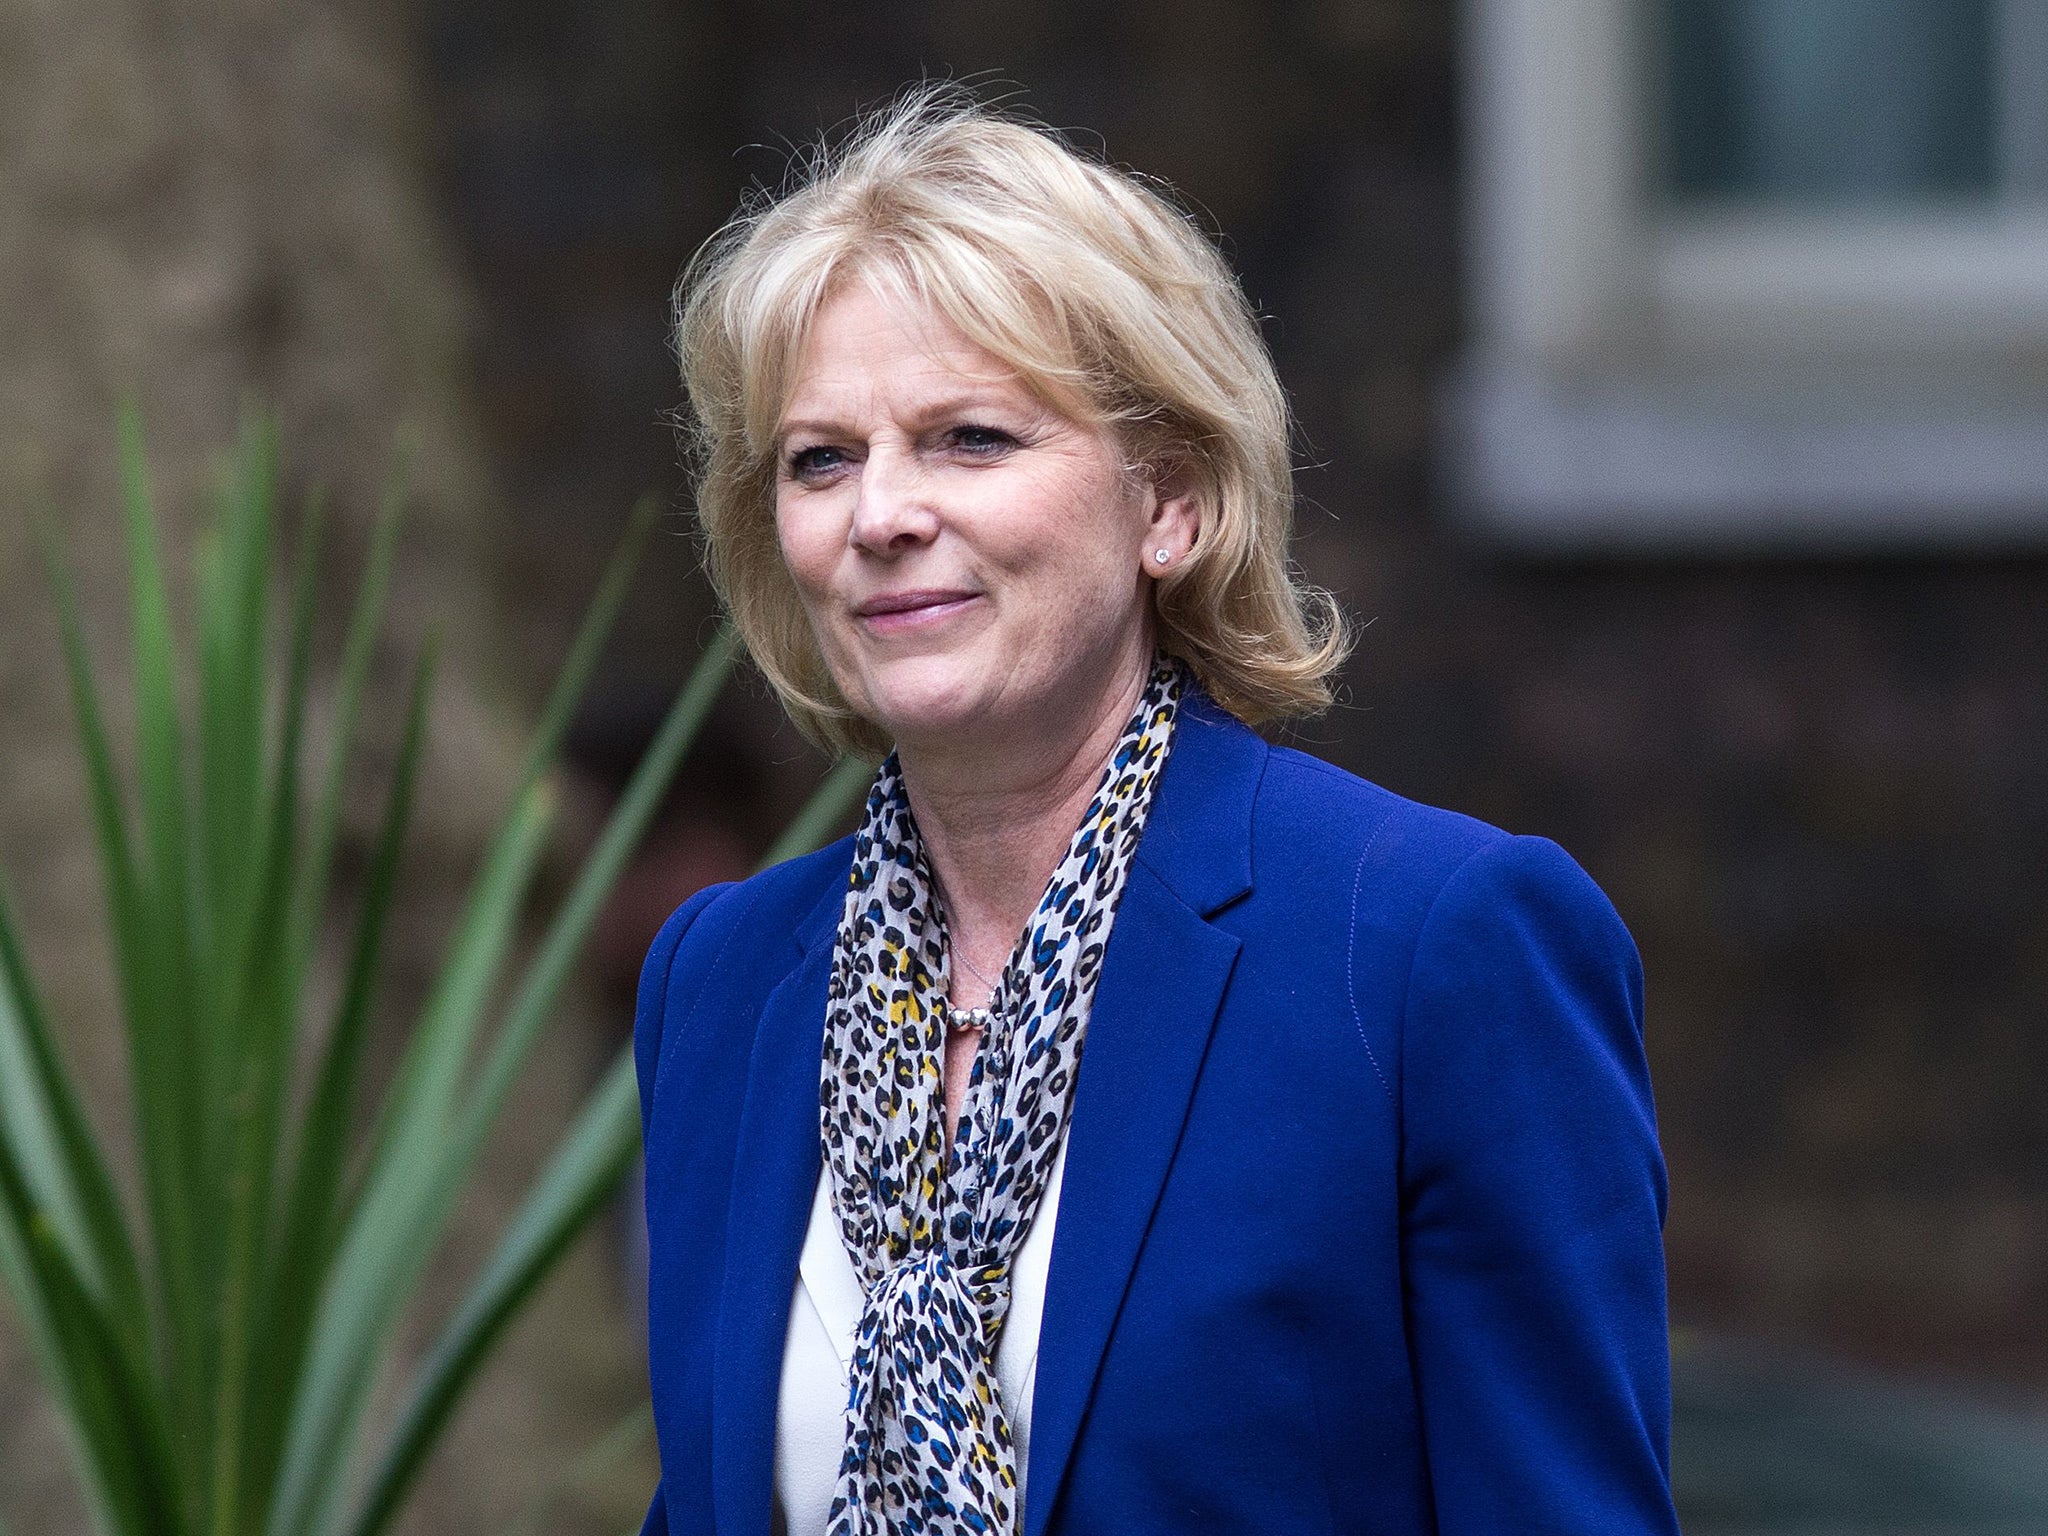 Pro-EU Tory Anna Soubry said her office has reported threatening tweets to the police